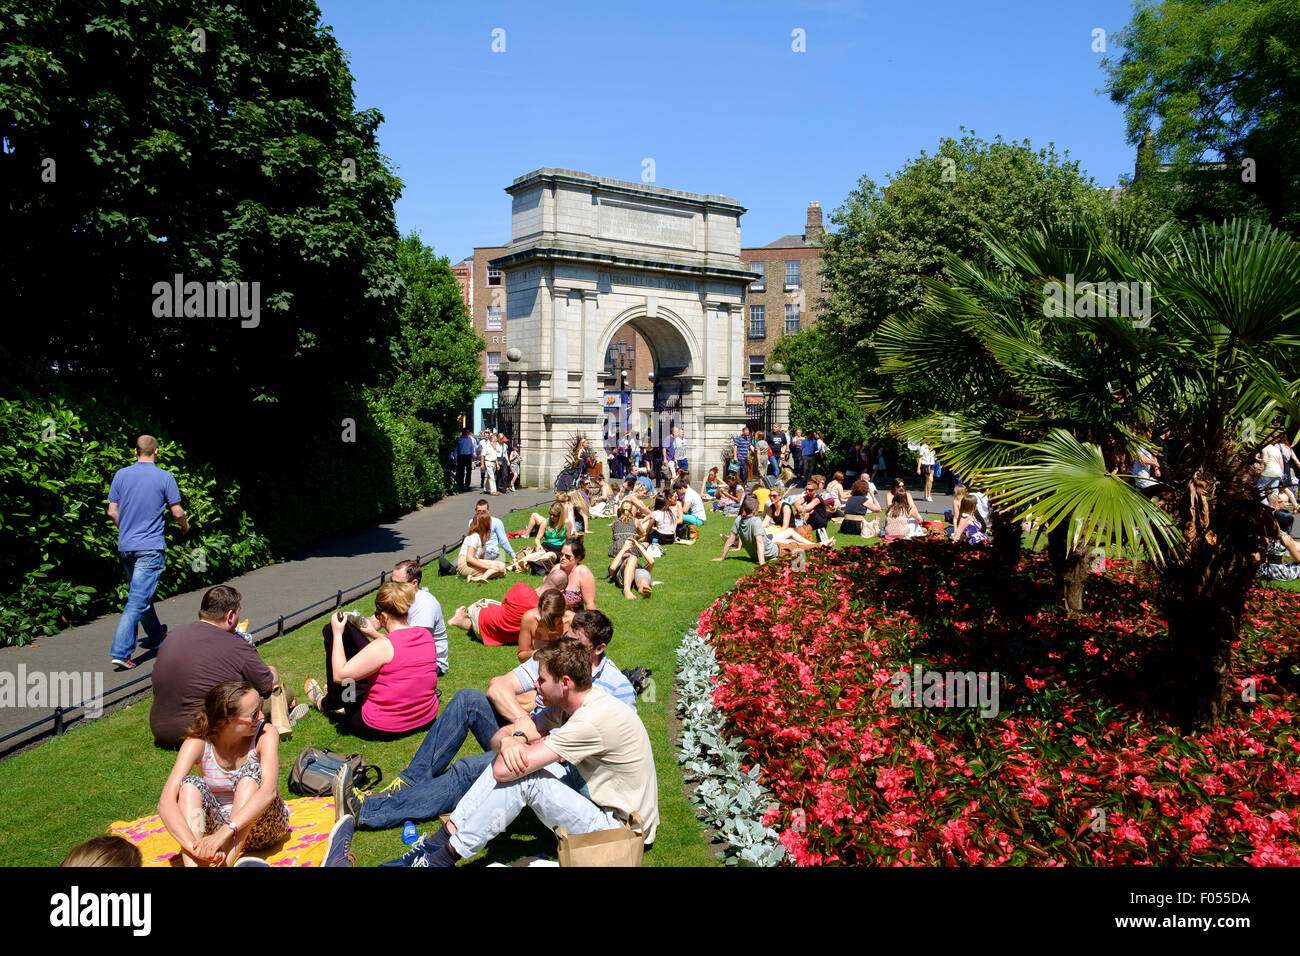 st stephens green dublin people relaxing summer lunch break sitting grass arch archway entrance Stock Photo